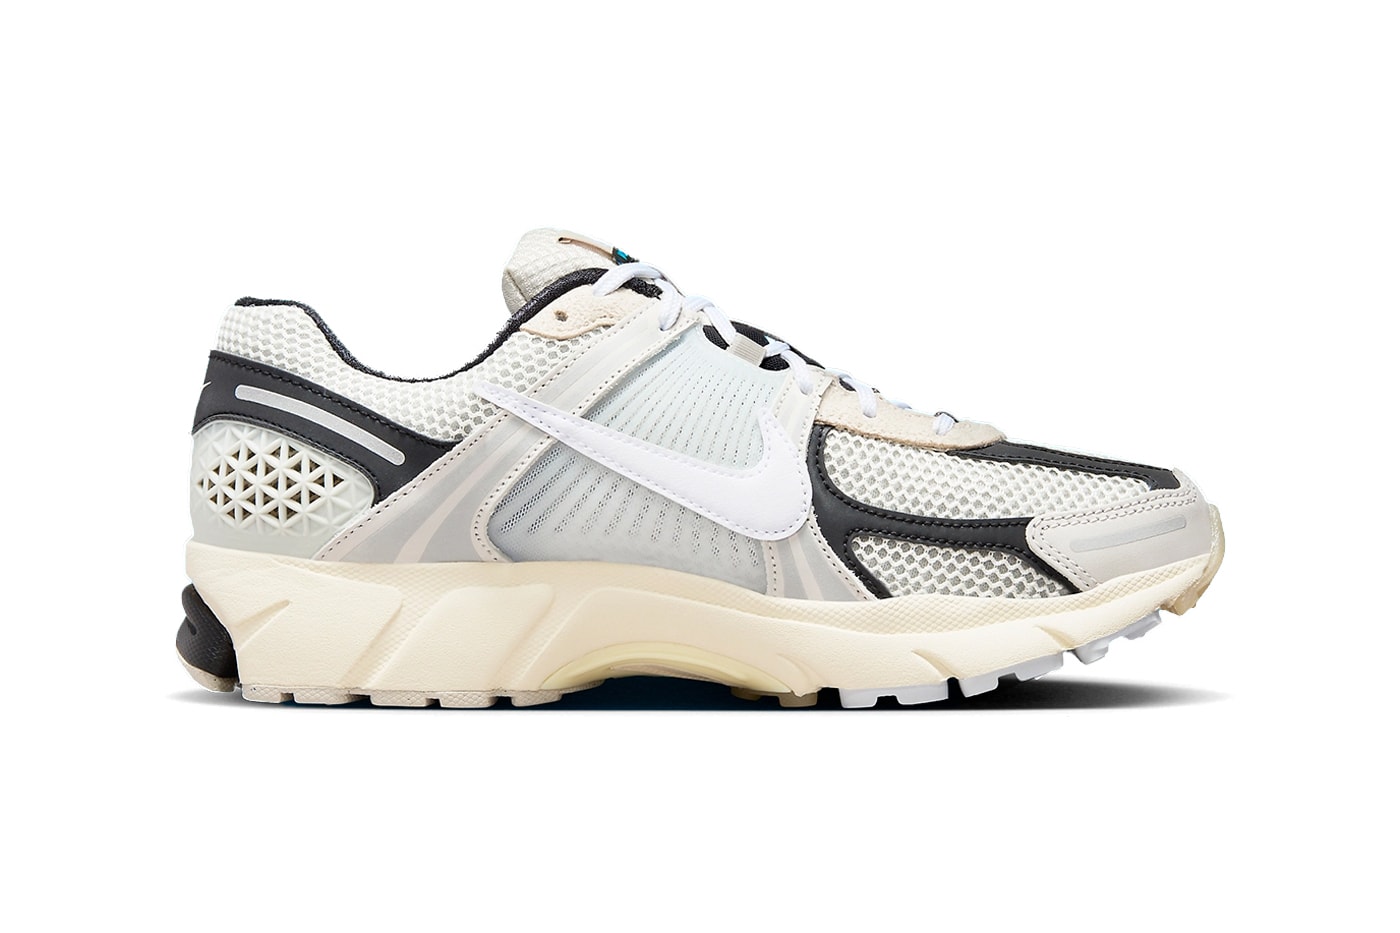 Nike Zoom Vomero 5 "Supersonic" Release Info black and white swoosh technical sneakers tpu caging comfort shoes